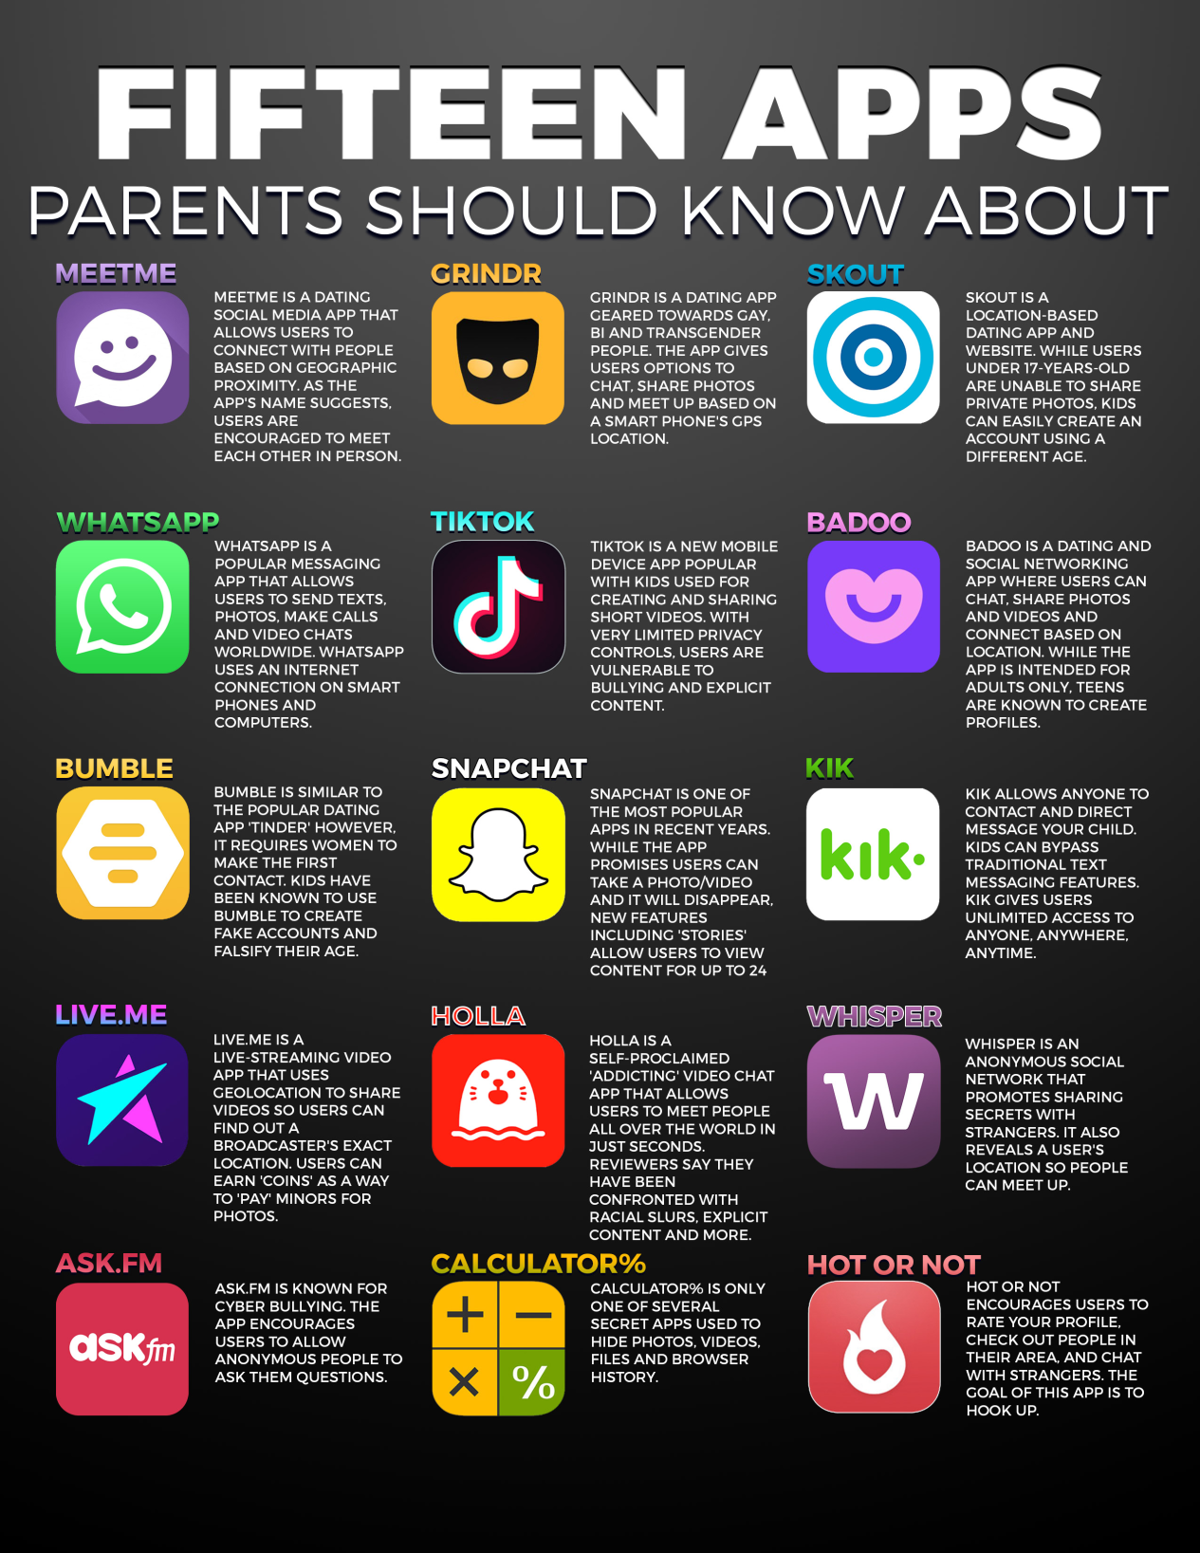 Police warn parents about 15 apps they should look out for ...